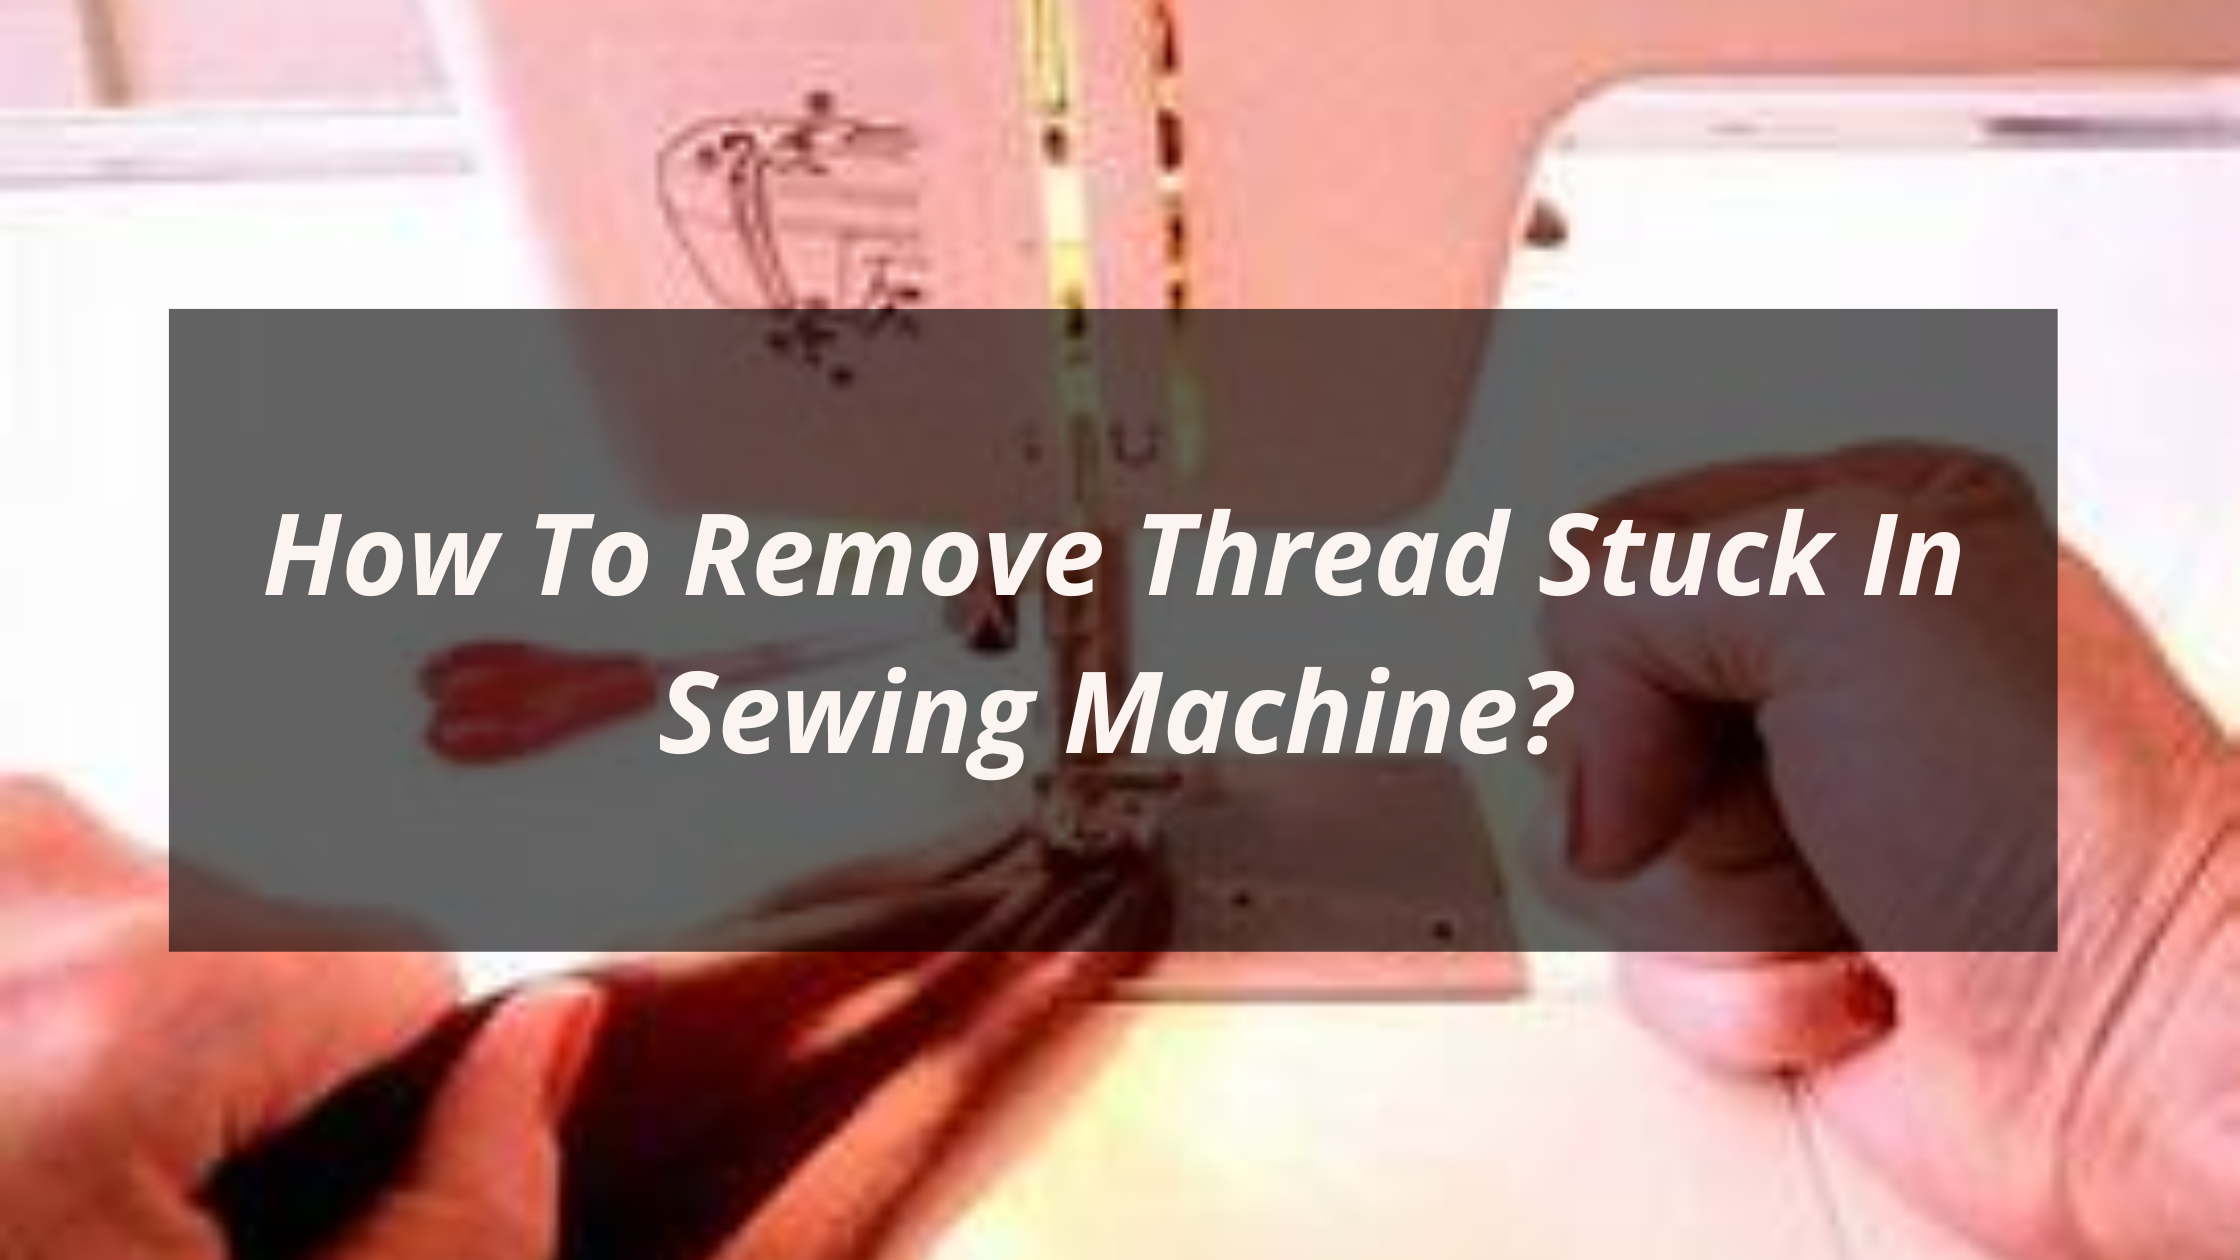 How To Remove Thread Stuck In Sewing Machine?